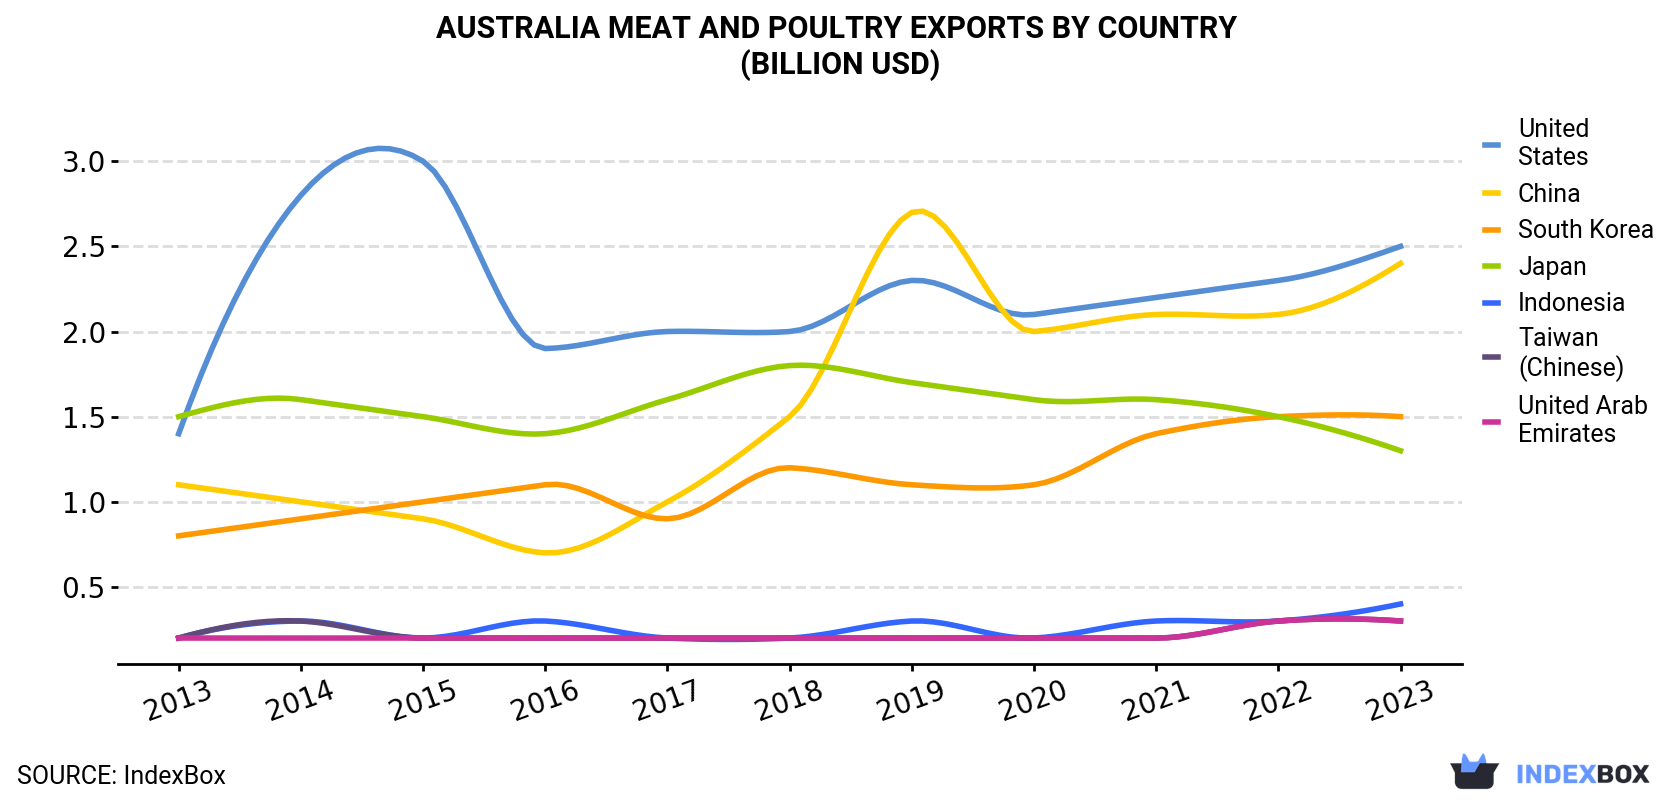 Australia Meat And Poultry Exports By Country (Billion USD)